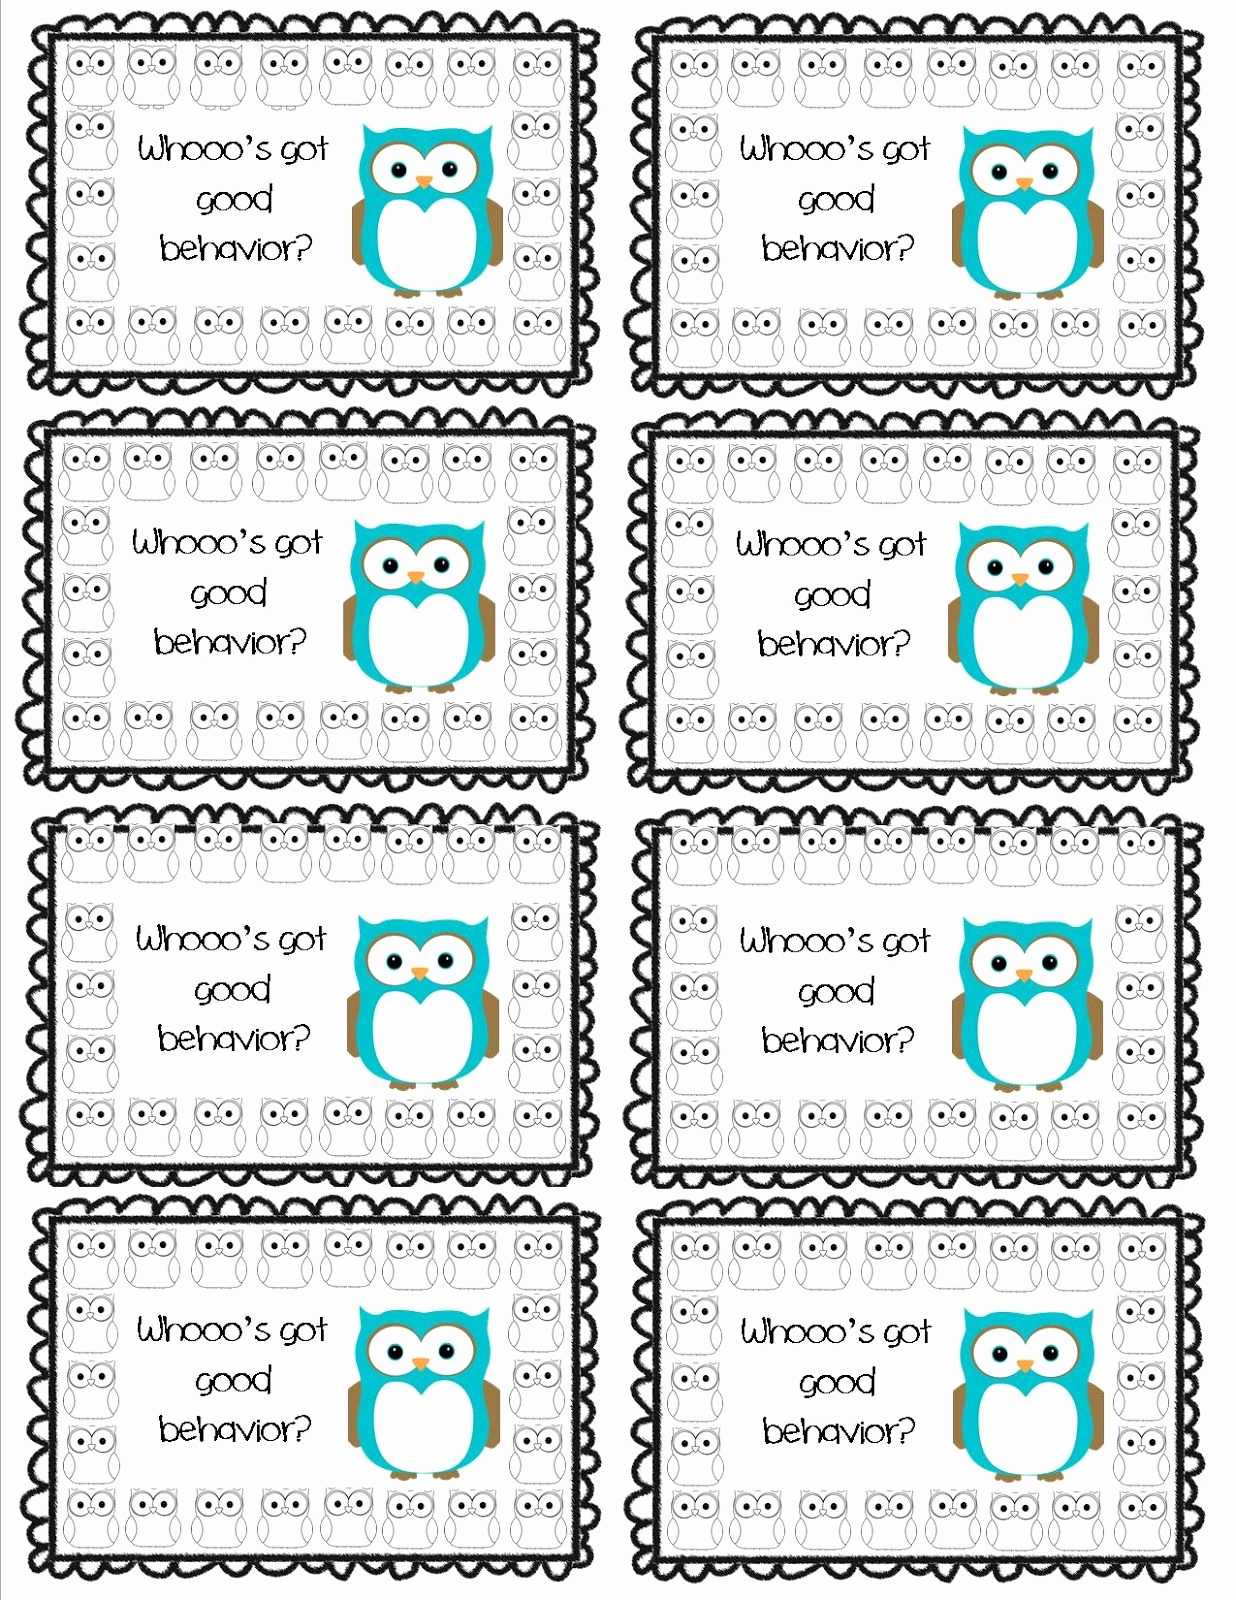 Free Printable Punch Card Template And Whooo S Got Good Inside Reward Punch Card Template